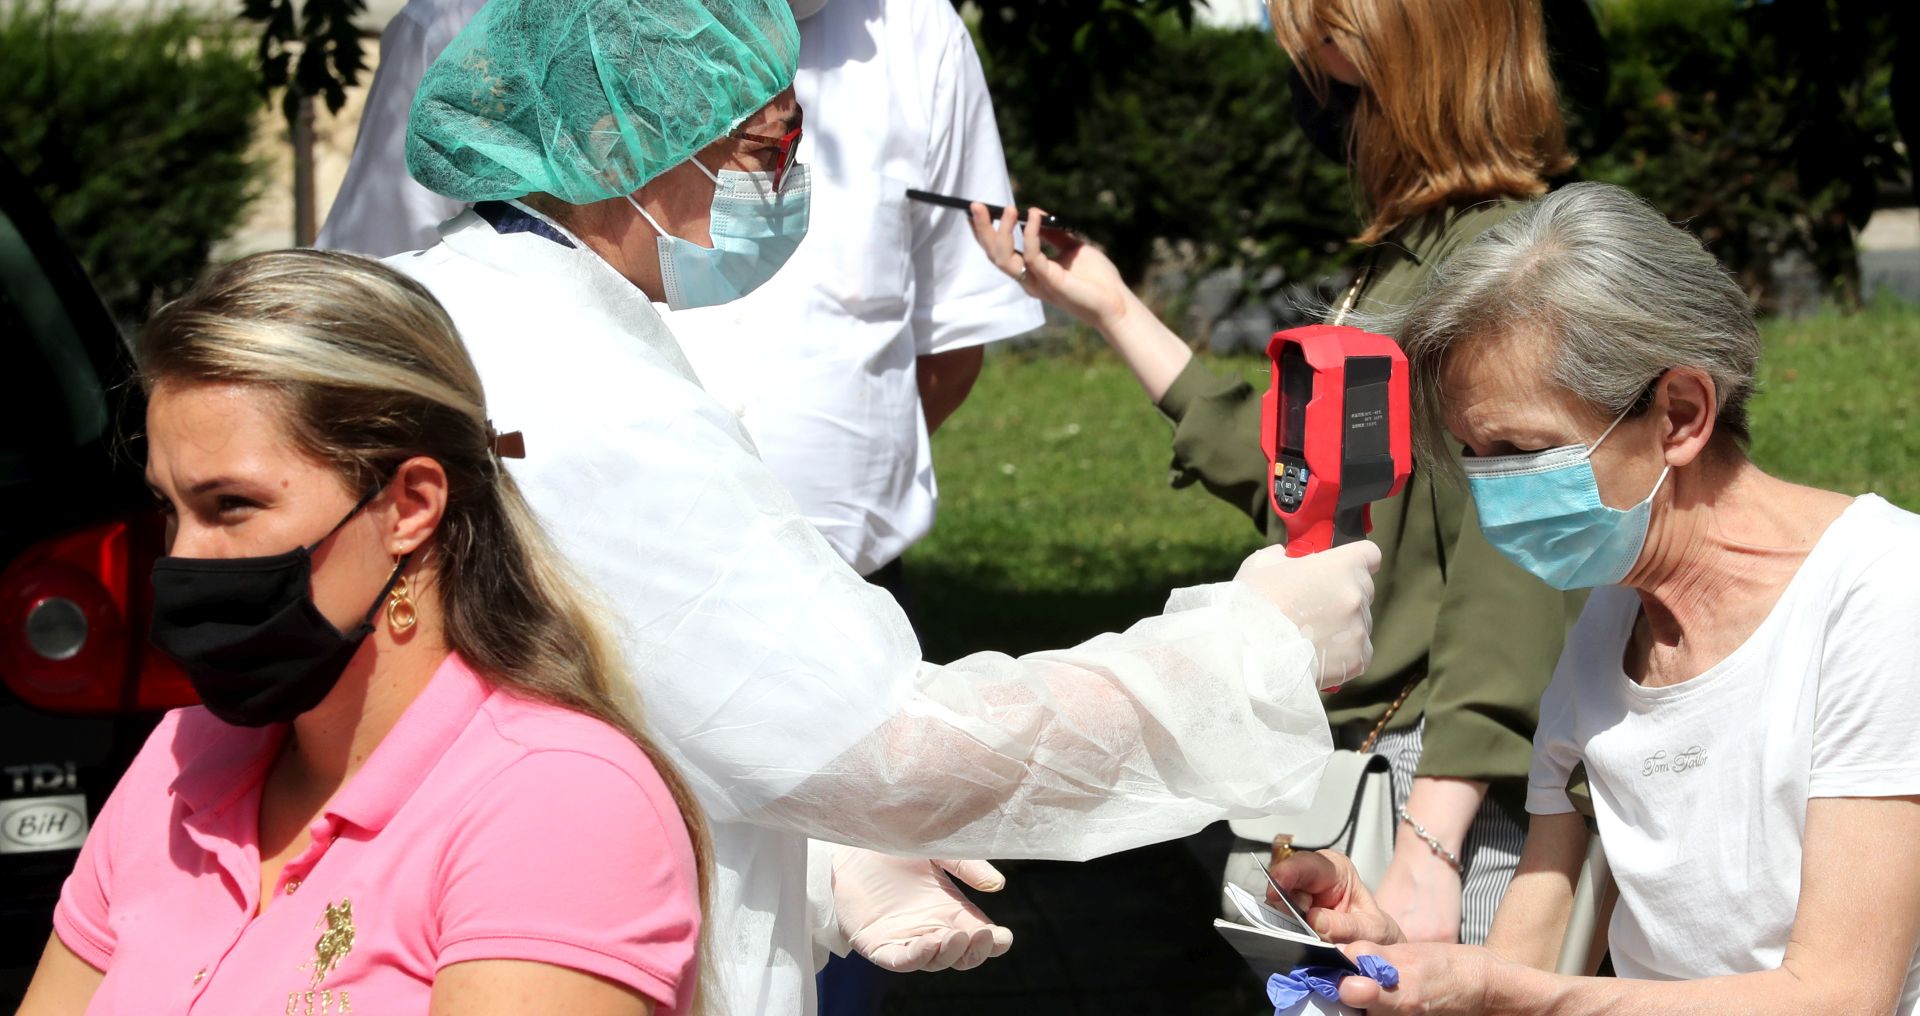 epa08637370 A medical staff attends to a woman as she arrives to test for coronavirus, at a hospital in Sarajevo, Bosnia and Herzegovina, 31 August 2020. Countries around the world are taking increased measures to stem the widespread of the SARS-CoV-2 coronavirus which causes the Covid-19 disease.  EPA/FEHIM DEMIR